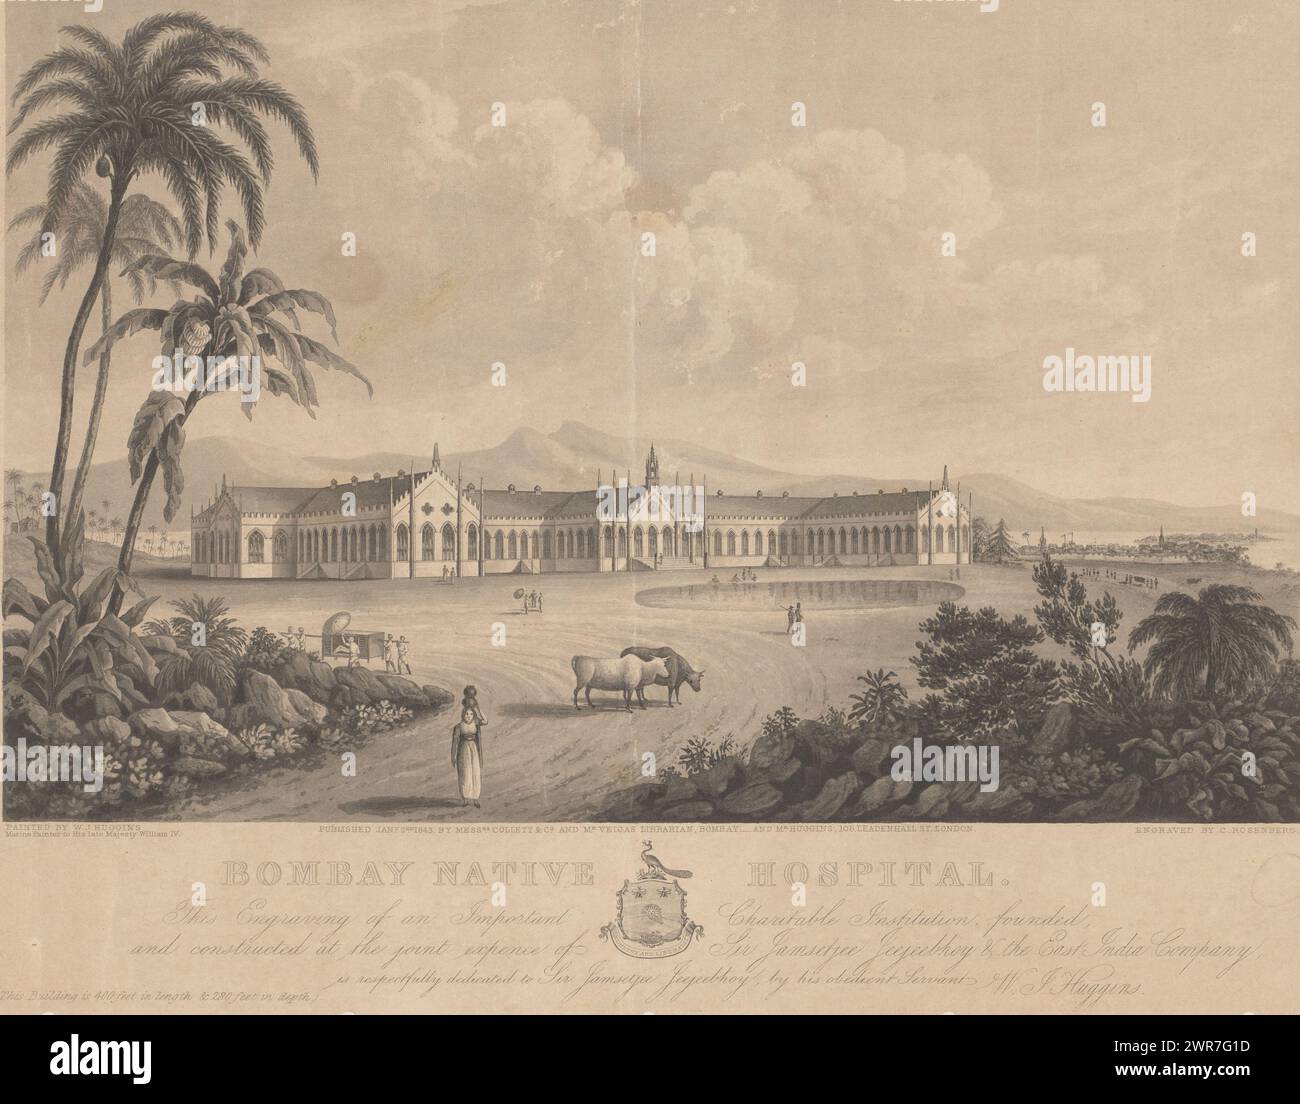 Hospital on the Coast, Bombay Native Hospital (title on object), Text in English in the bottom margin., print maker: Christian Rosenberg, after painting by: William John Huggins, publisher: Collette & Co, Mumbai, 1843, paper, etching, height 275 mm × width 354 mm, print Stock Photo